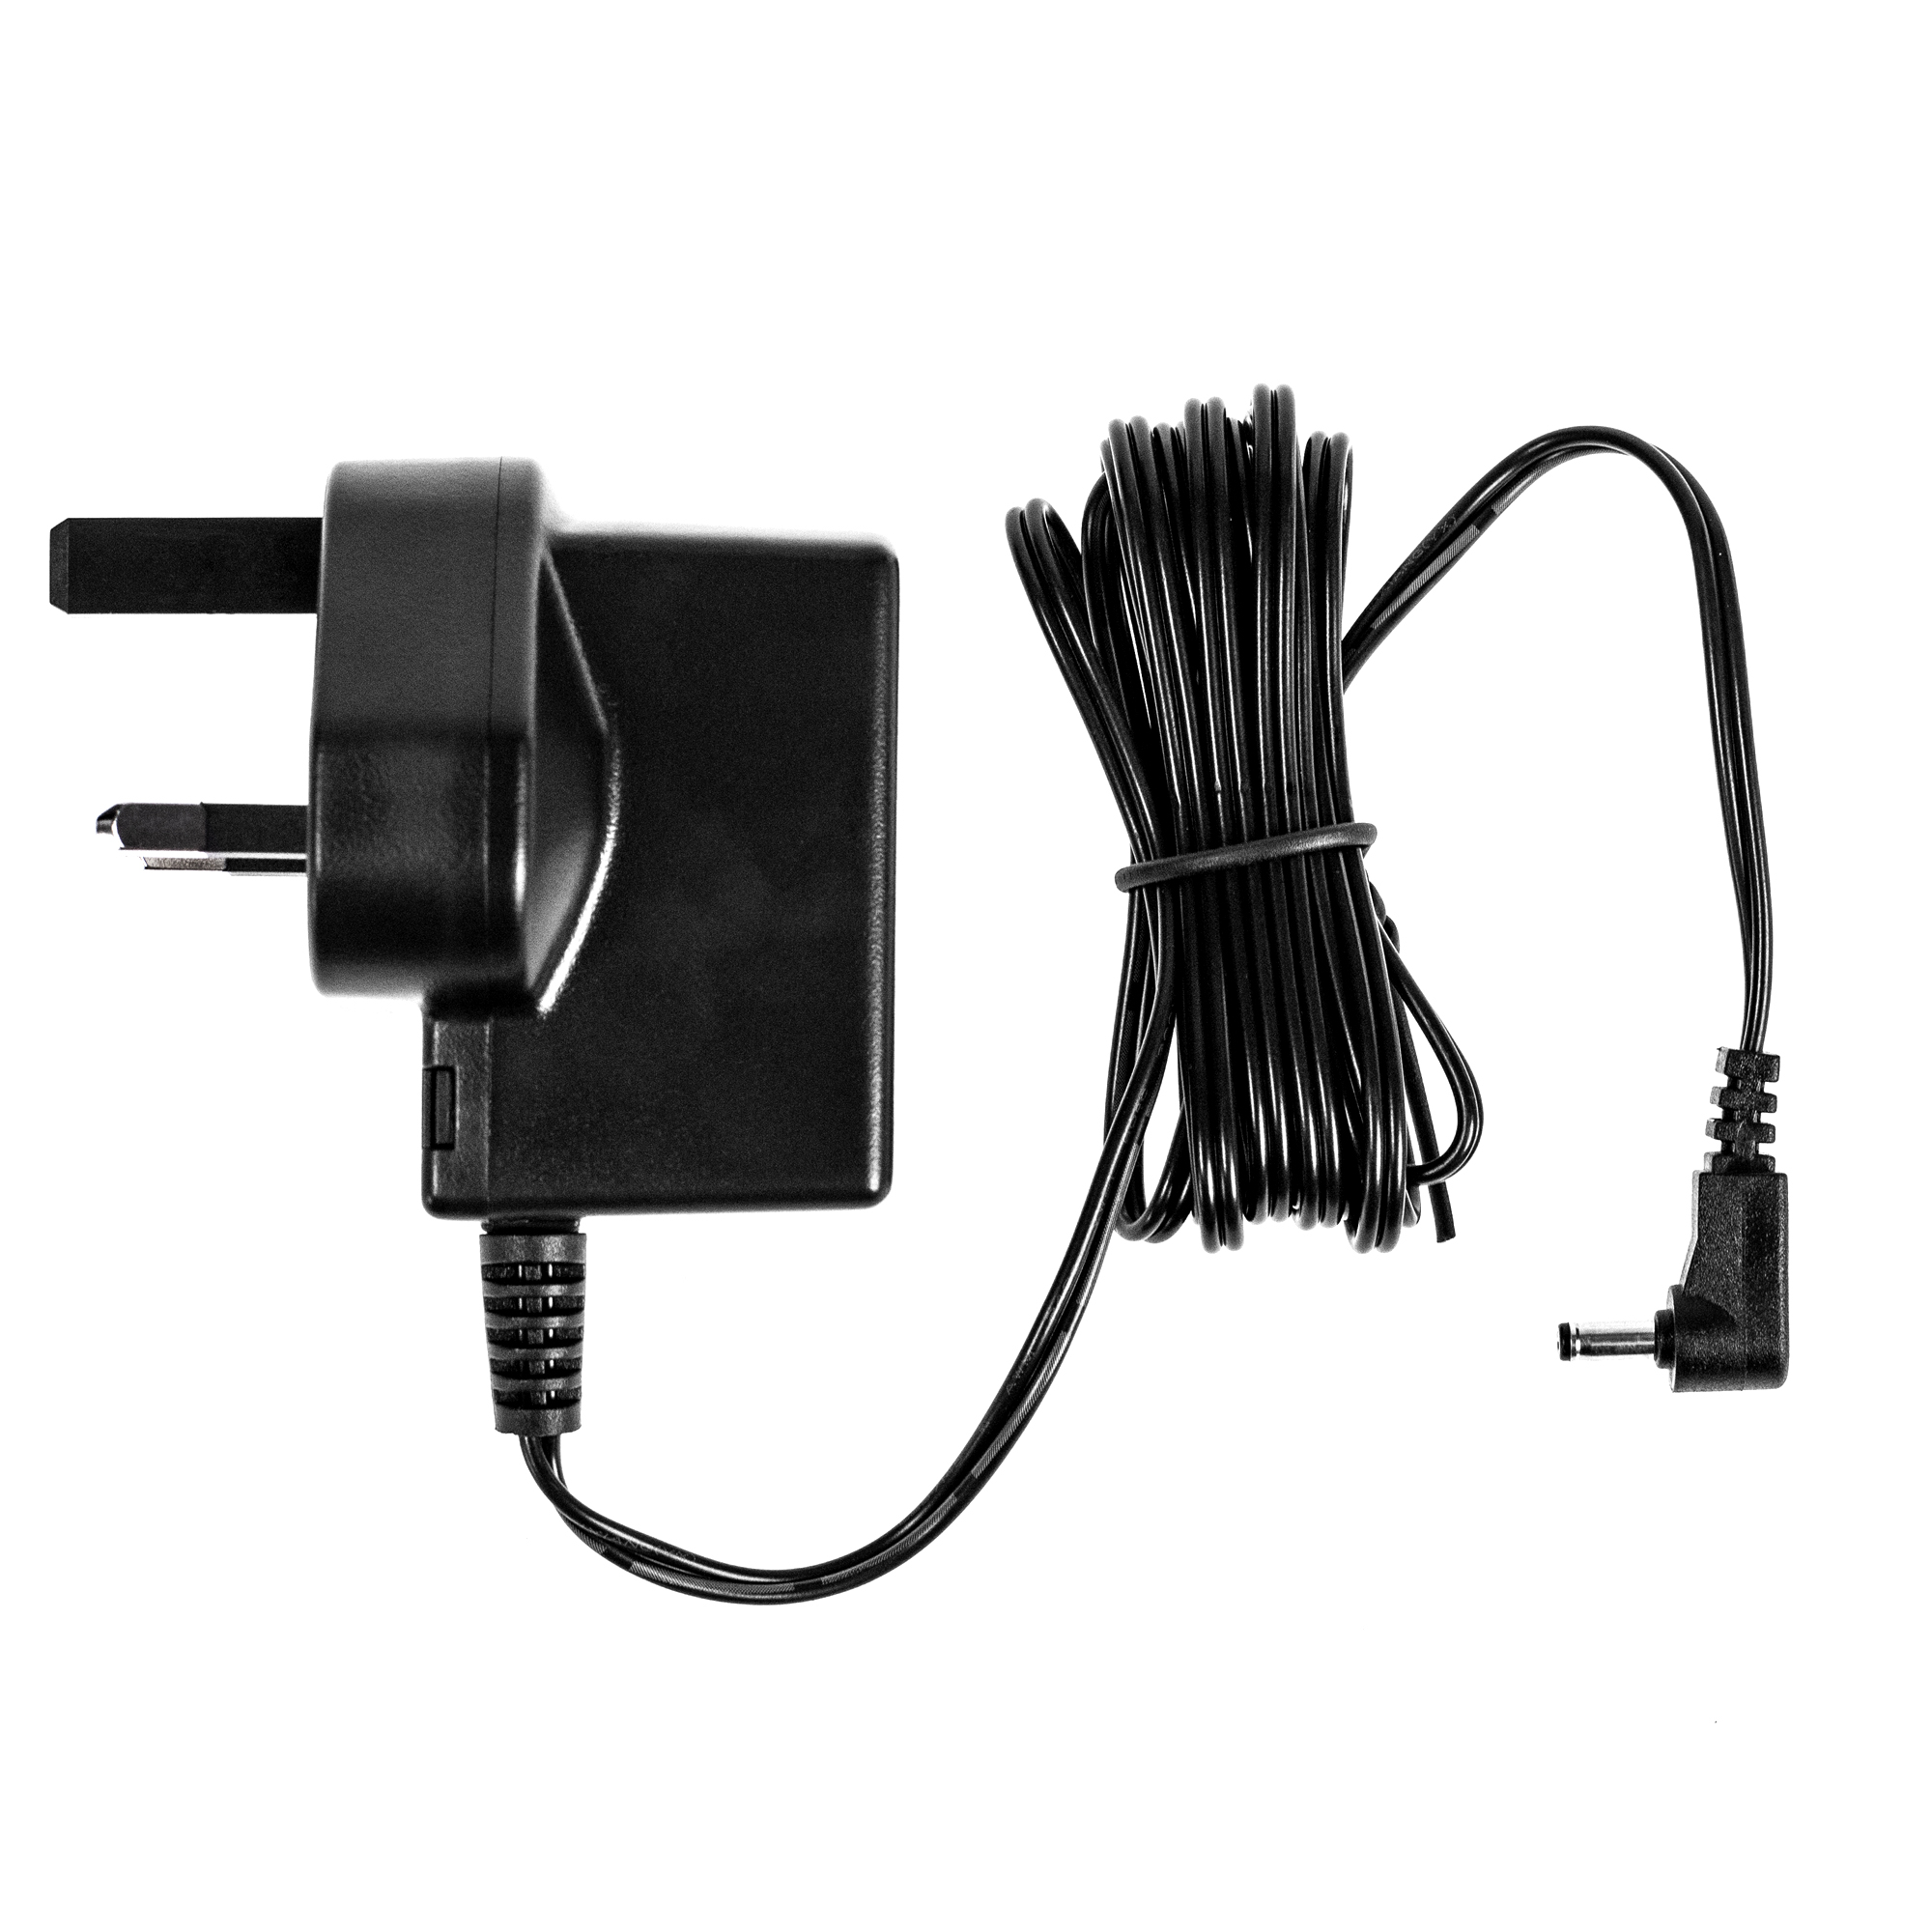 power cord for wahl clipper